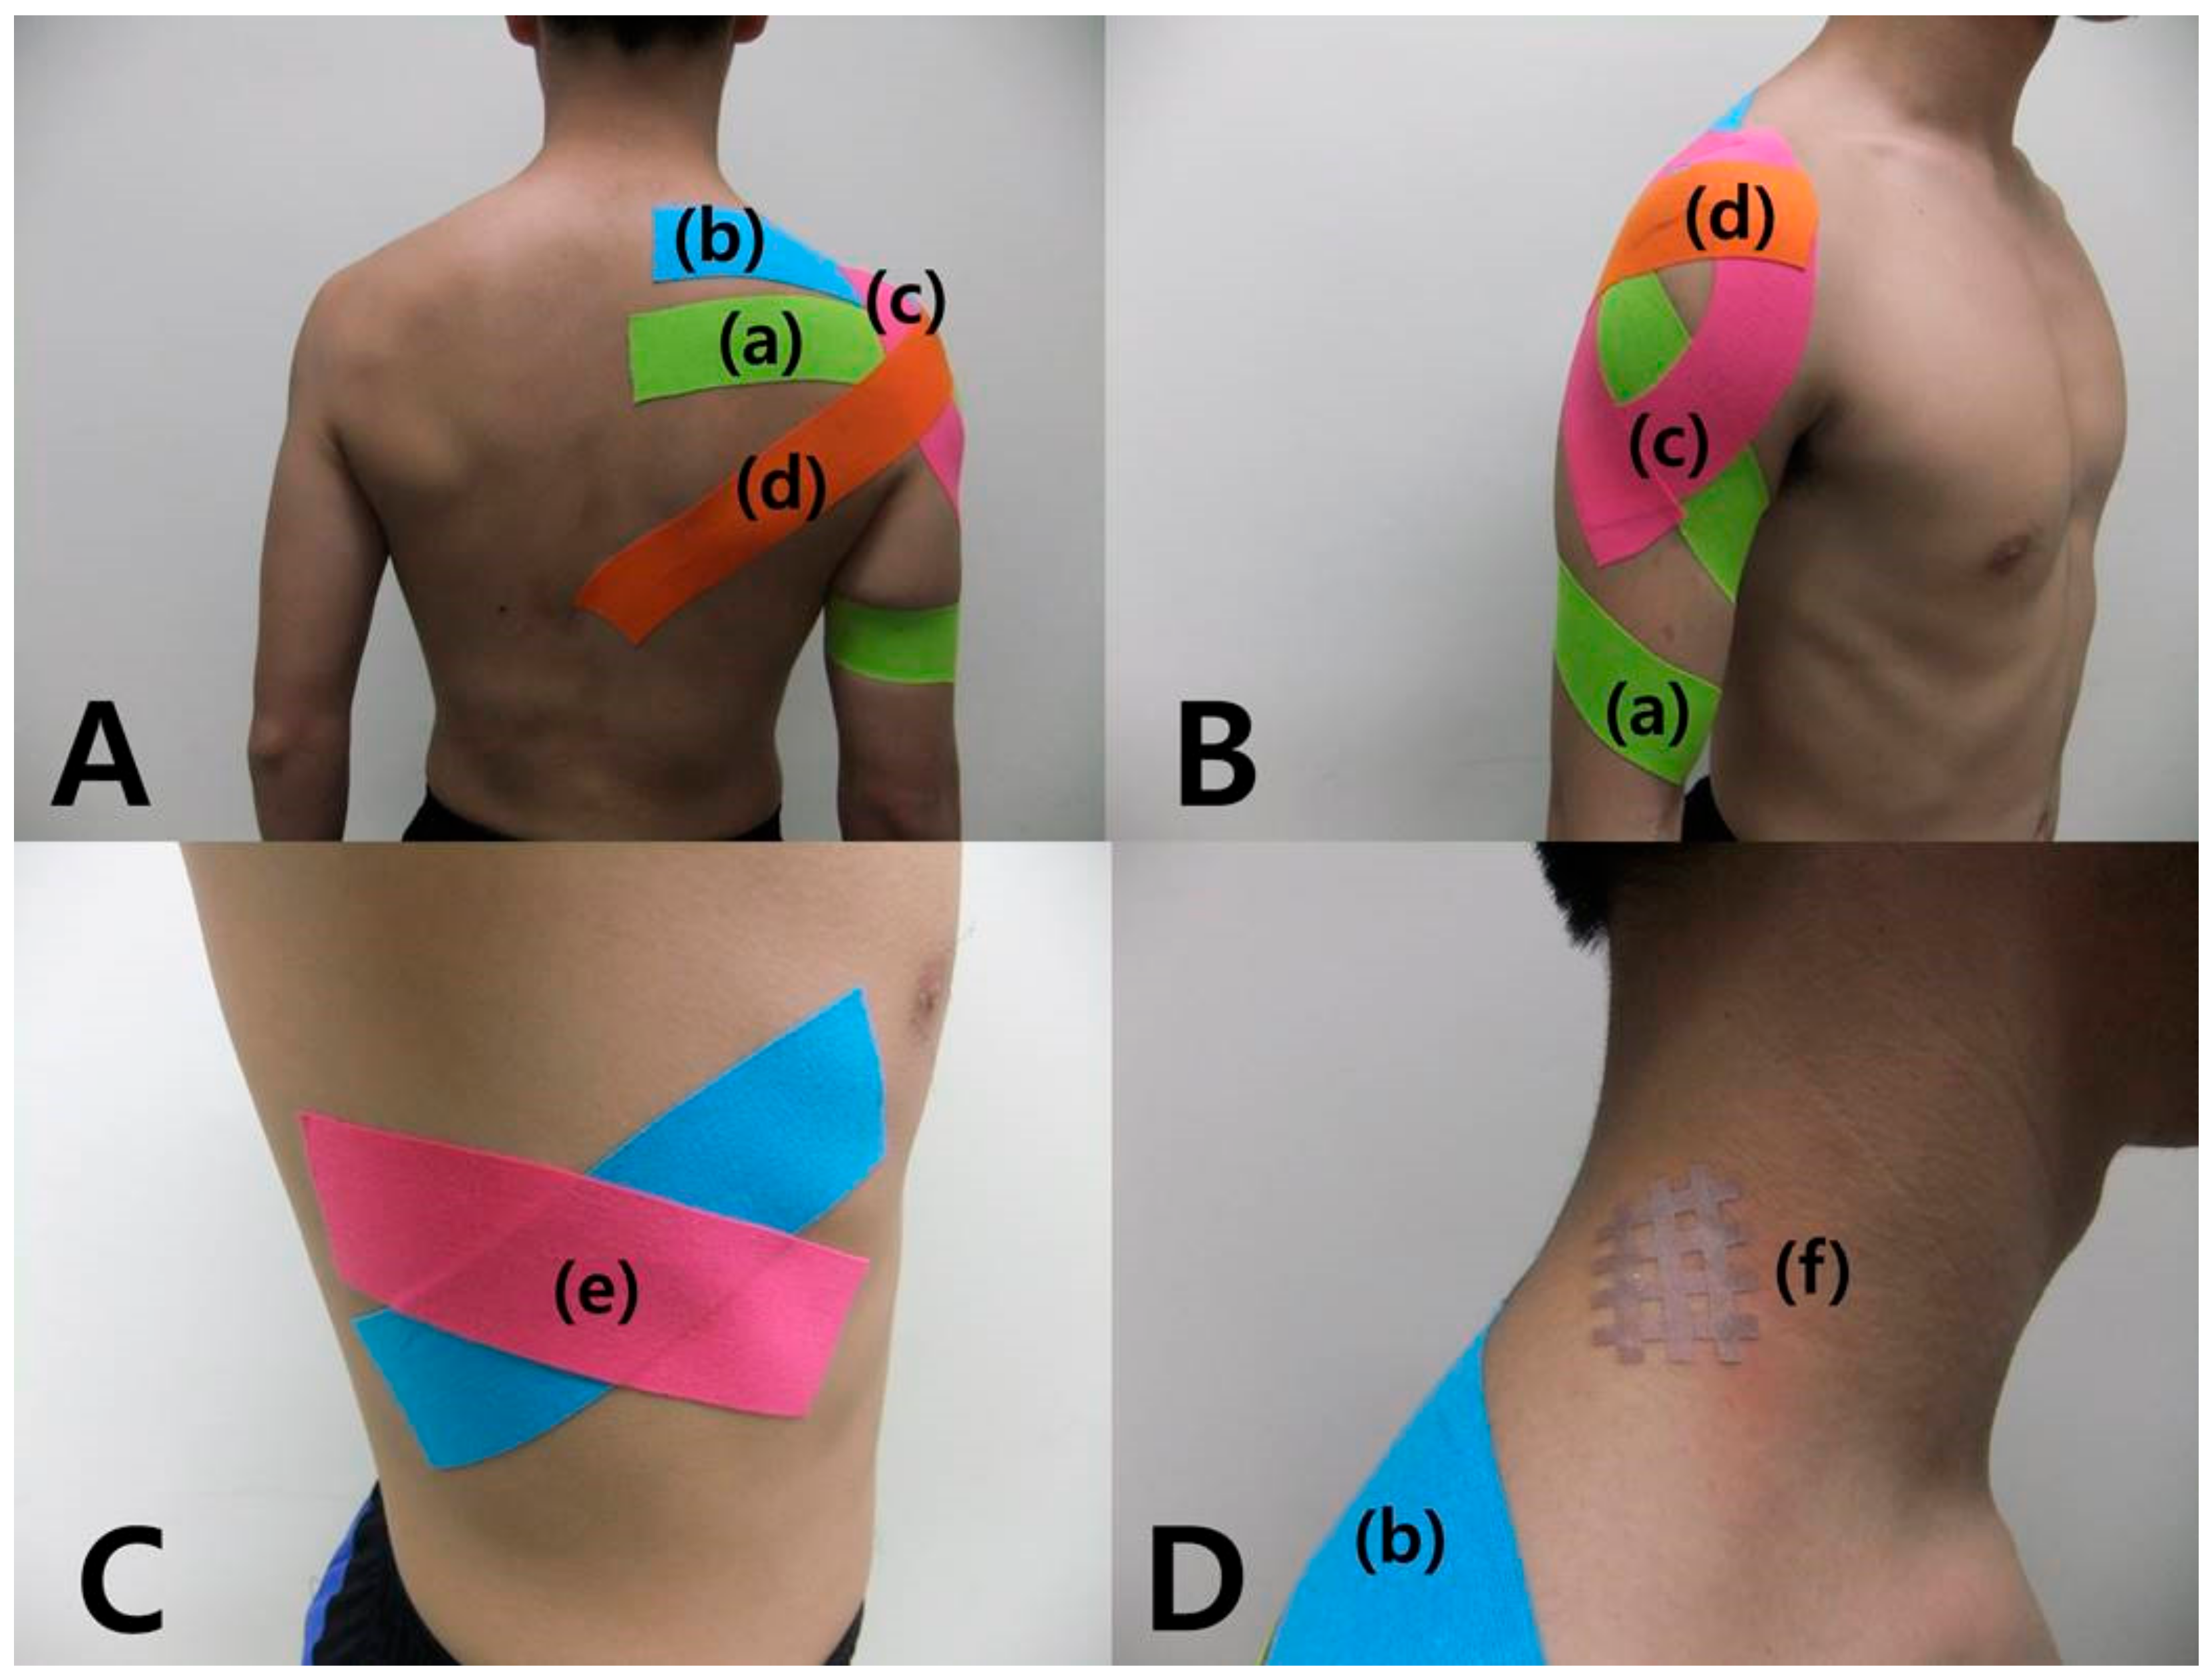 Effects of Kinesiology Taping for Pain, Disability, and Performance